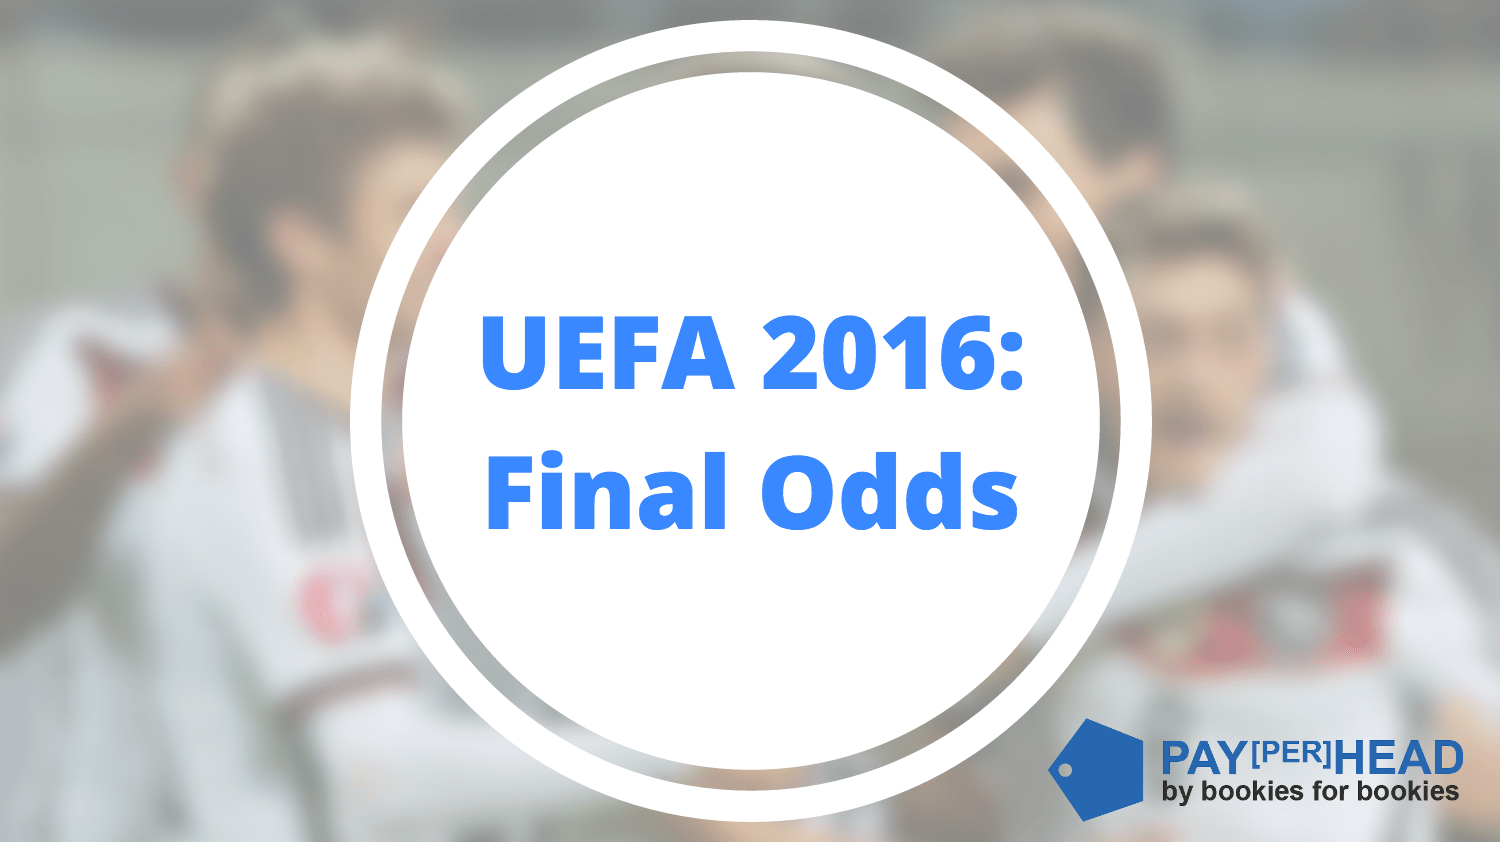 Why The UEFA 2016 Final Odds Matter To Bookies